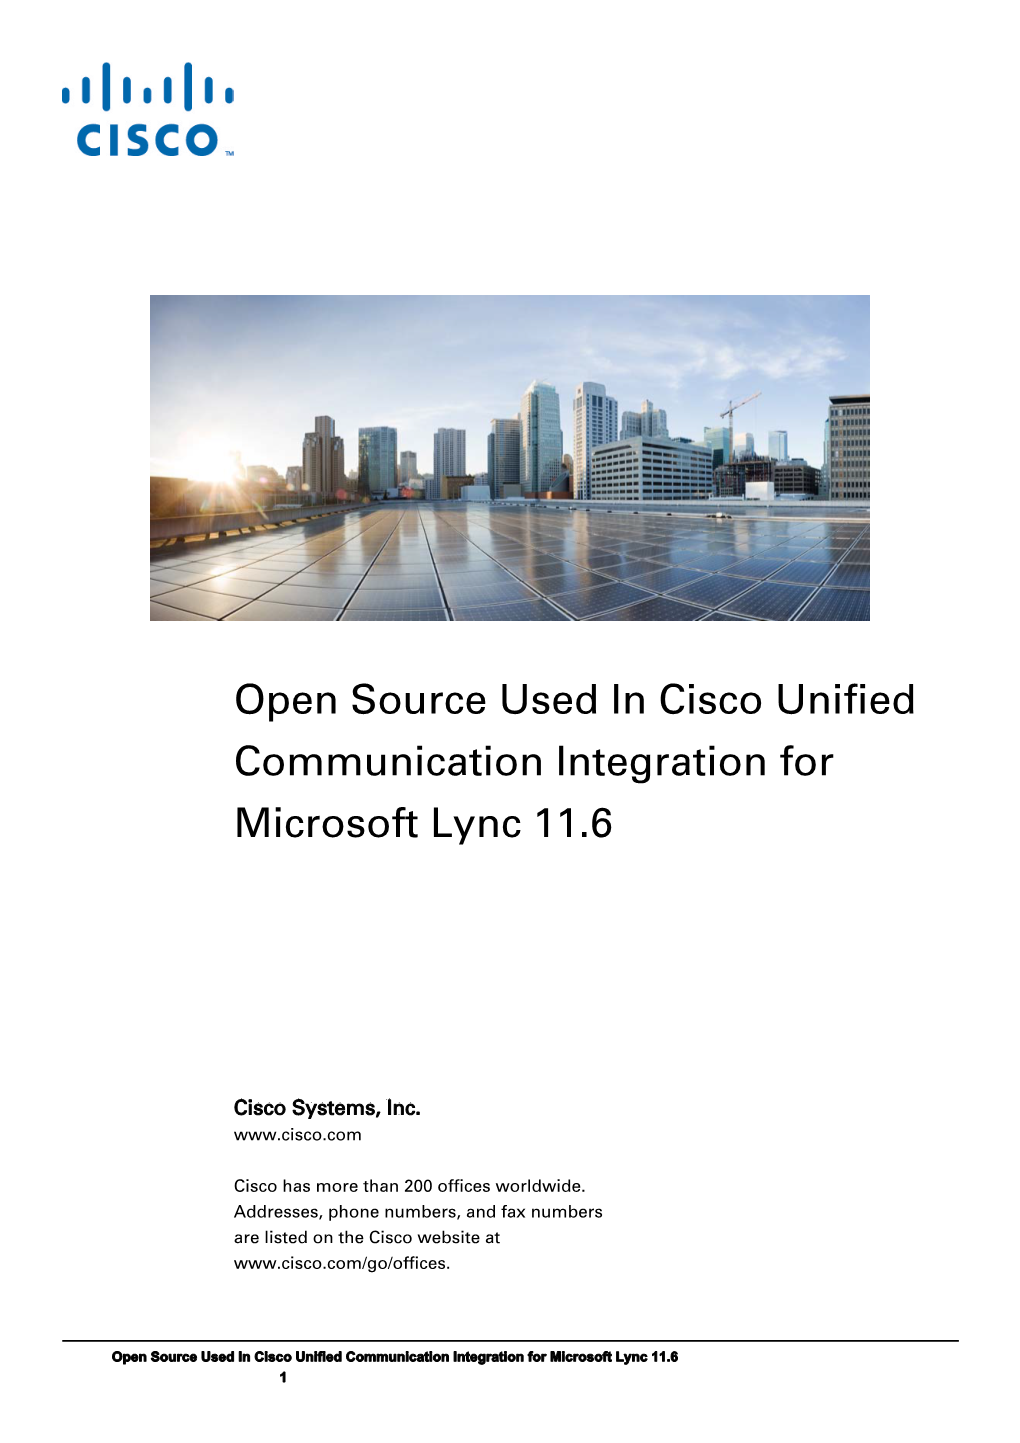 Open Source Used in Cisco Unified Communication Integration for Microsoft Lync 11.6